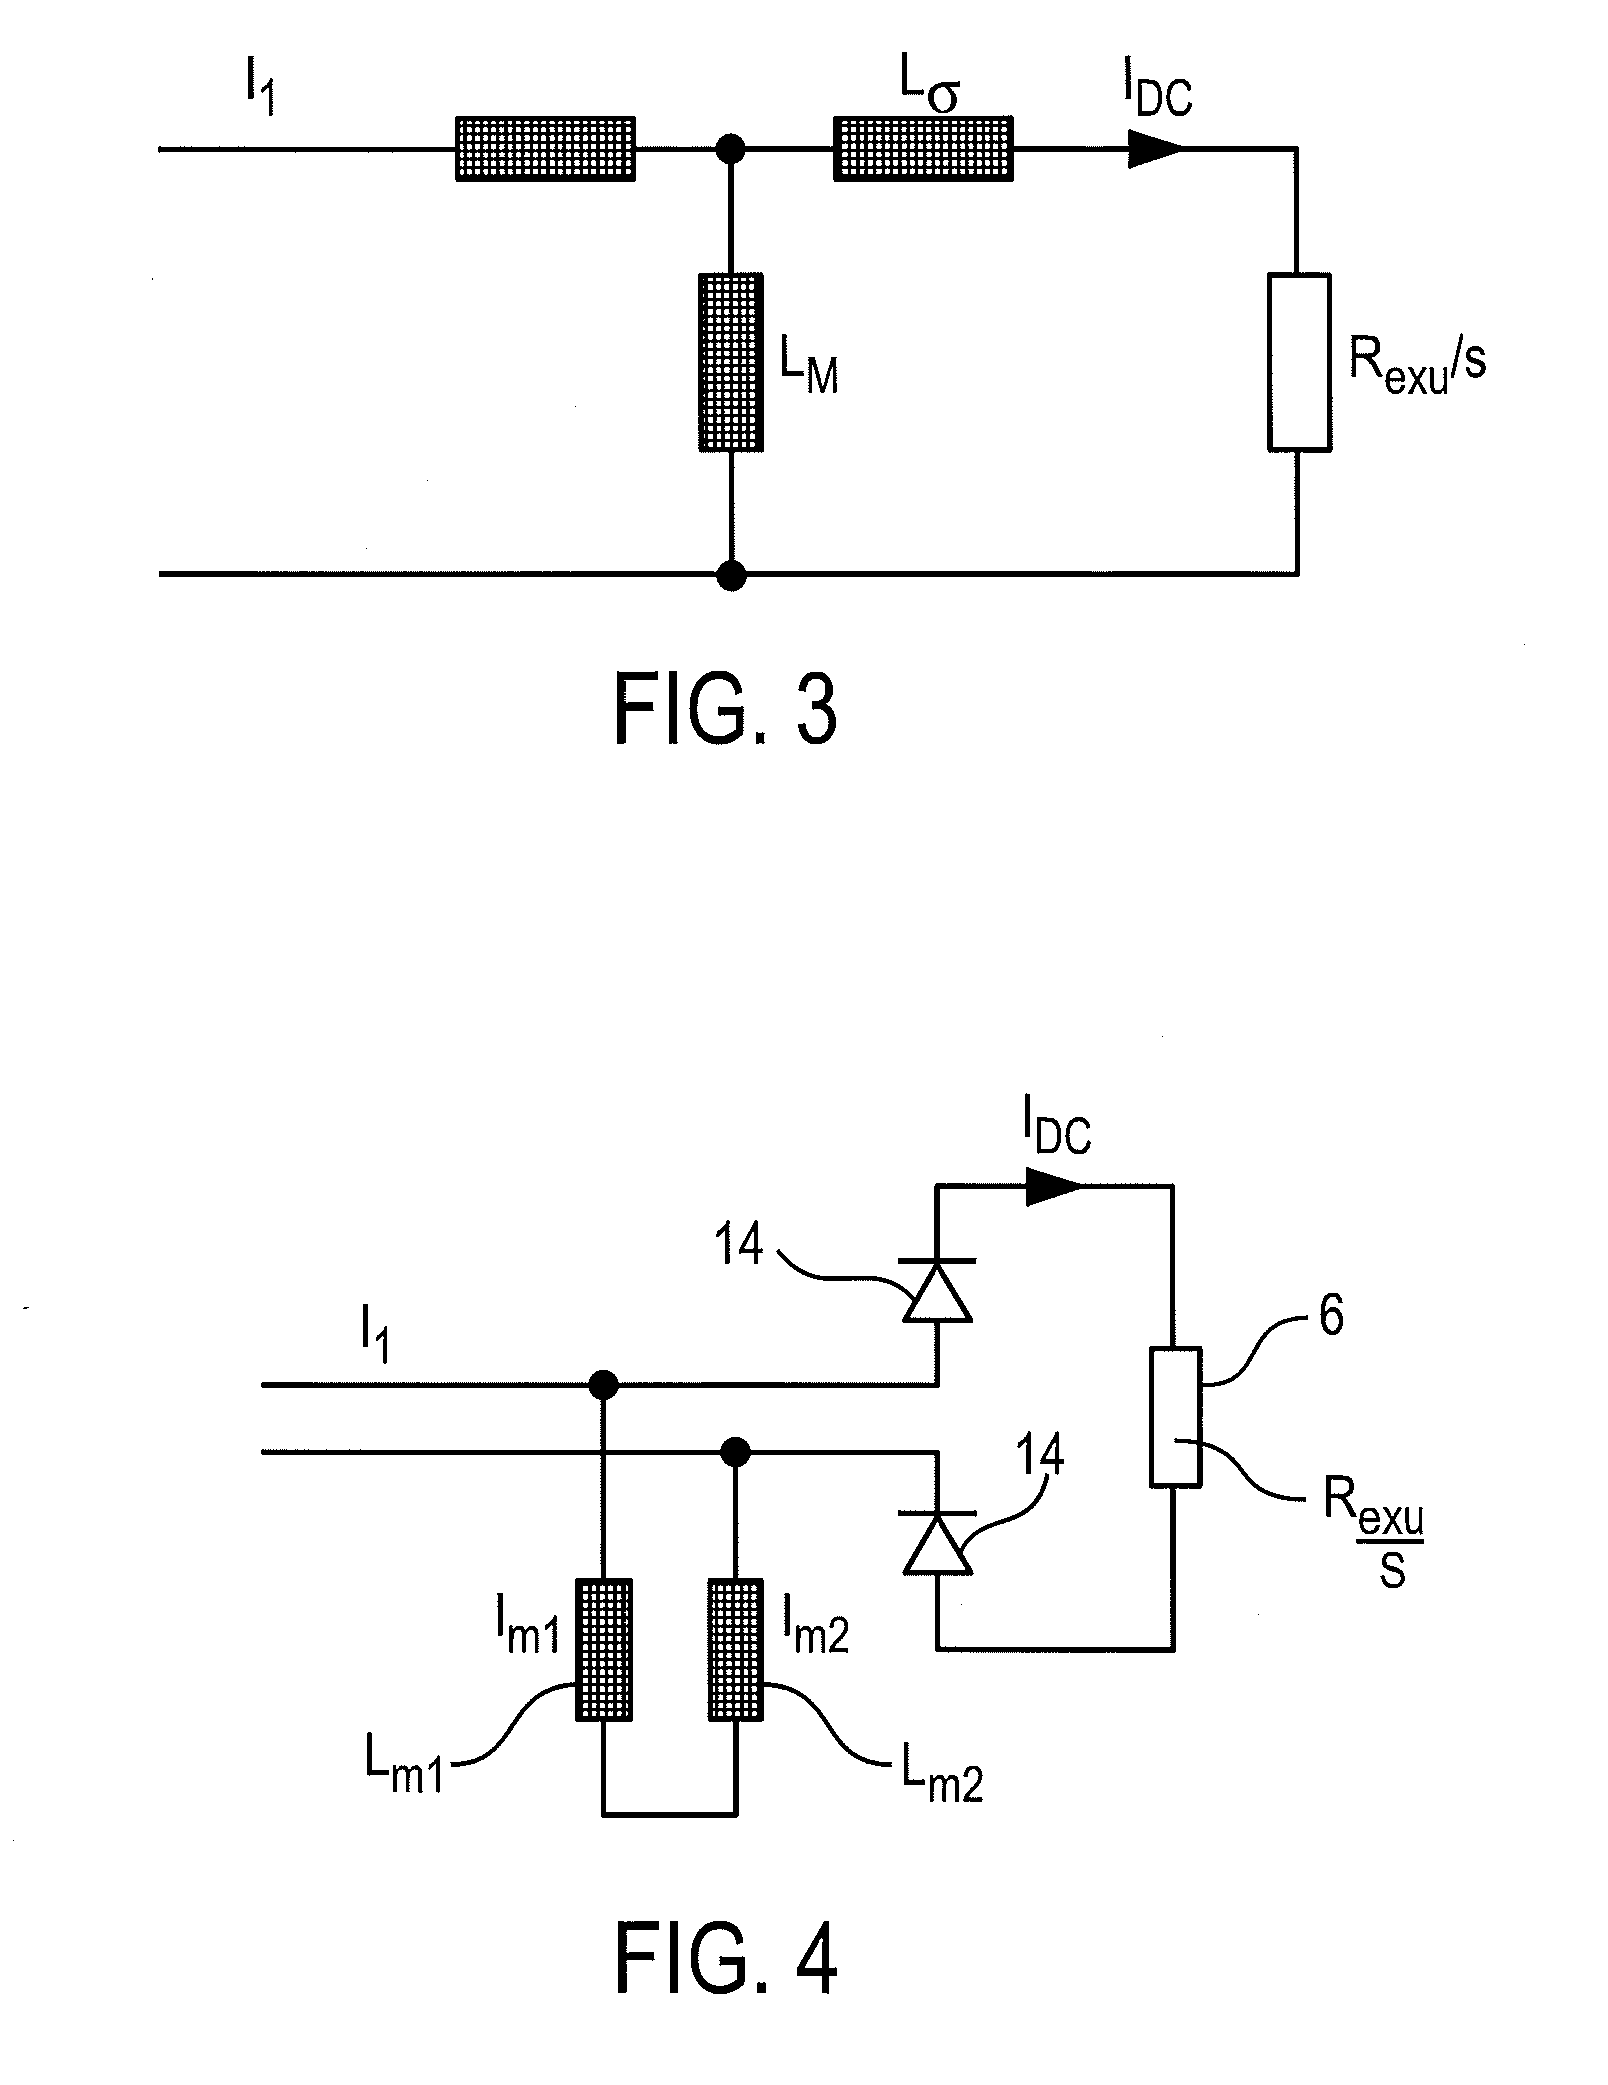 Method and apparatus for determining a field current in brushless electrical machines